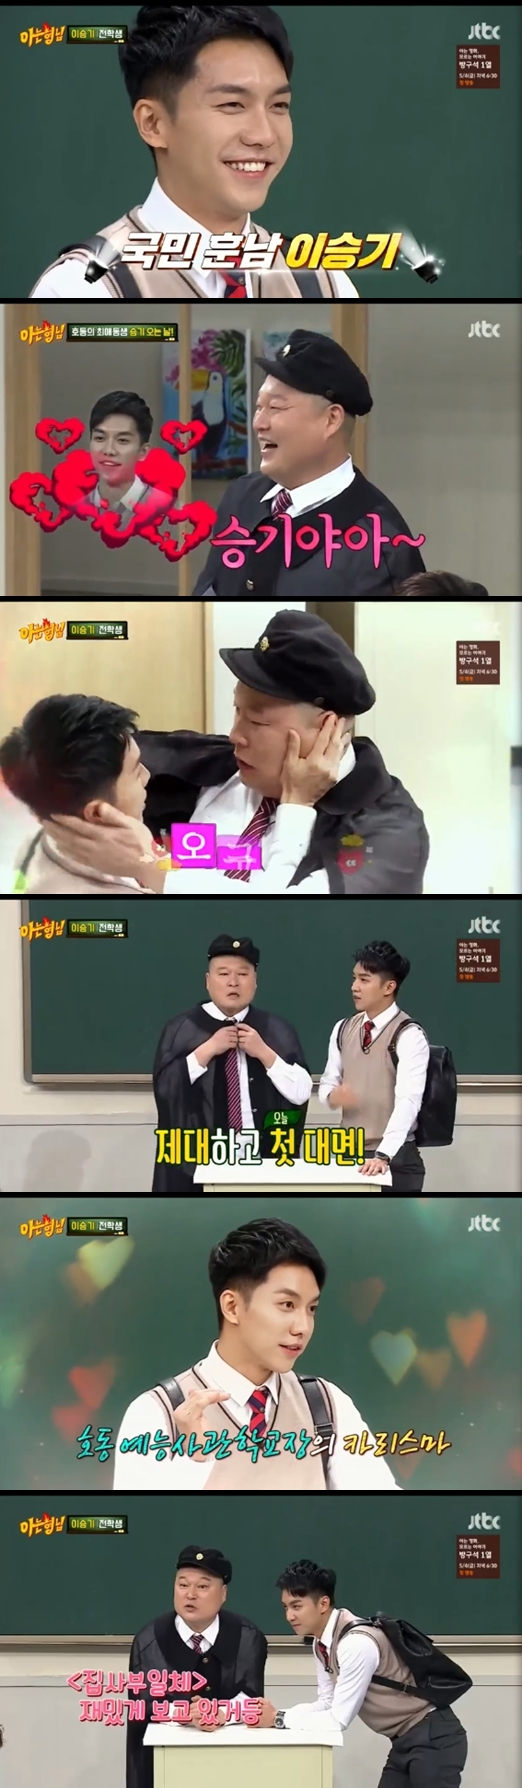 JTBC broadcast on the 21st, brother you know Kang Ho-dong stumbled upon Lee Seung-gis My girlfriend Humming.Next, Civil service will transfer to school today.My favorite brother Lee Seung-gi cried name.Lee Seung-gi appeared boasting honors visual.Im happy.The most nervous theorder after the whole area.Im sitting somewhere Im used to being done. Next, I introduced Lee Seung-gi, a citizens younger brother who has been transferred since he became a national guy.Kang Ho-dong said, I wanted to see it, he shined.Lee Seung-gi said, Lets have a very nice meeting.There is no desire to visit.I did not call you.It is completely the first time to discharge it. Kang Ho-dong, who is interested in All The Butlers, said, I am from Kang Ho-dong Performing Arts College.True sub-da.Naturally it will come out within two months, he promised negotiations.For the reason why Come back was done with All The Butlers instead of Shinsei Journey, There was no particular contact.It seems there was a calculation that it would have lost feeling going to the army. Previous Kang Ho-dong chose Lee Seung-gi instead of Son Min-ho at the time of my brother World Cup.Lee Seung-gi said, There was a big fuss in the next day troops.I was thankful to tell you the name of Welonde if you are in the military. However, about the fact that I chose Kang Ho-dong from Isodin at Our Type World Cup, I was proud of the entertainment feeling that I do not like Lee Sojin type like that.In addition to this, I trained Kang Ho-dong as an admission application form, such as dancing without dancing.Lee Seung-gi led a dance declaration ceremony I want to receive.Kang Ho-dong finally decided to say until the reward dance, video letter, eye change.However, as for Lee Seung-gis hope buddy, it was laughed at the Kang Ho-dong after Lee Suk laughter.On the other hand, I told the story that I took a speaker present, I still wrote well, I am ambitious when I talked about one night two days to play.It also revealed a behind scenario with Lee Suk.Suppose Lee Seung takes a football friendly match with Lee Seung-gis visit.Lee Seung-gi revealed, Its not my story and I just felt that I had to make laughter with the adventurous journey headliner.Kim Hee-chul said, We have learned the secret of going to the army where we had no contacts so far.Wool.Unlike my heart, my feet were so painful and painful that I cried a lot. Meanwhile, Lee Seung-gi has an image of correct life.I confessed the opportunity I wanted to live.I was waiting for Barrett 4 cars in front of my car.I only saw a tail lamp and did not know about mama tea.I thought it would be impossible to see what kind of situation the manager had, but to be my mother.I could not pretend to know. Following the Four-character Idol confrontation.Unlike expectations, Lee Seung-gi bumped into difficulties.After all, lost to Kang Ho-dong shock / Photo = JTBC broadcast screen